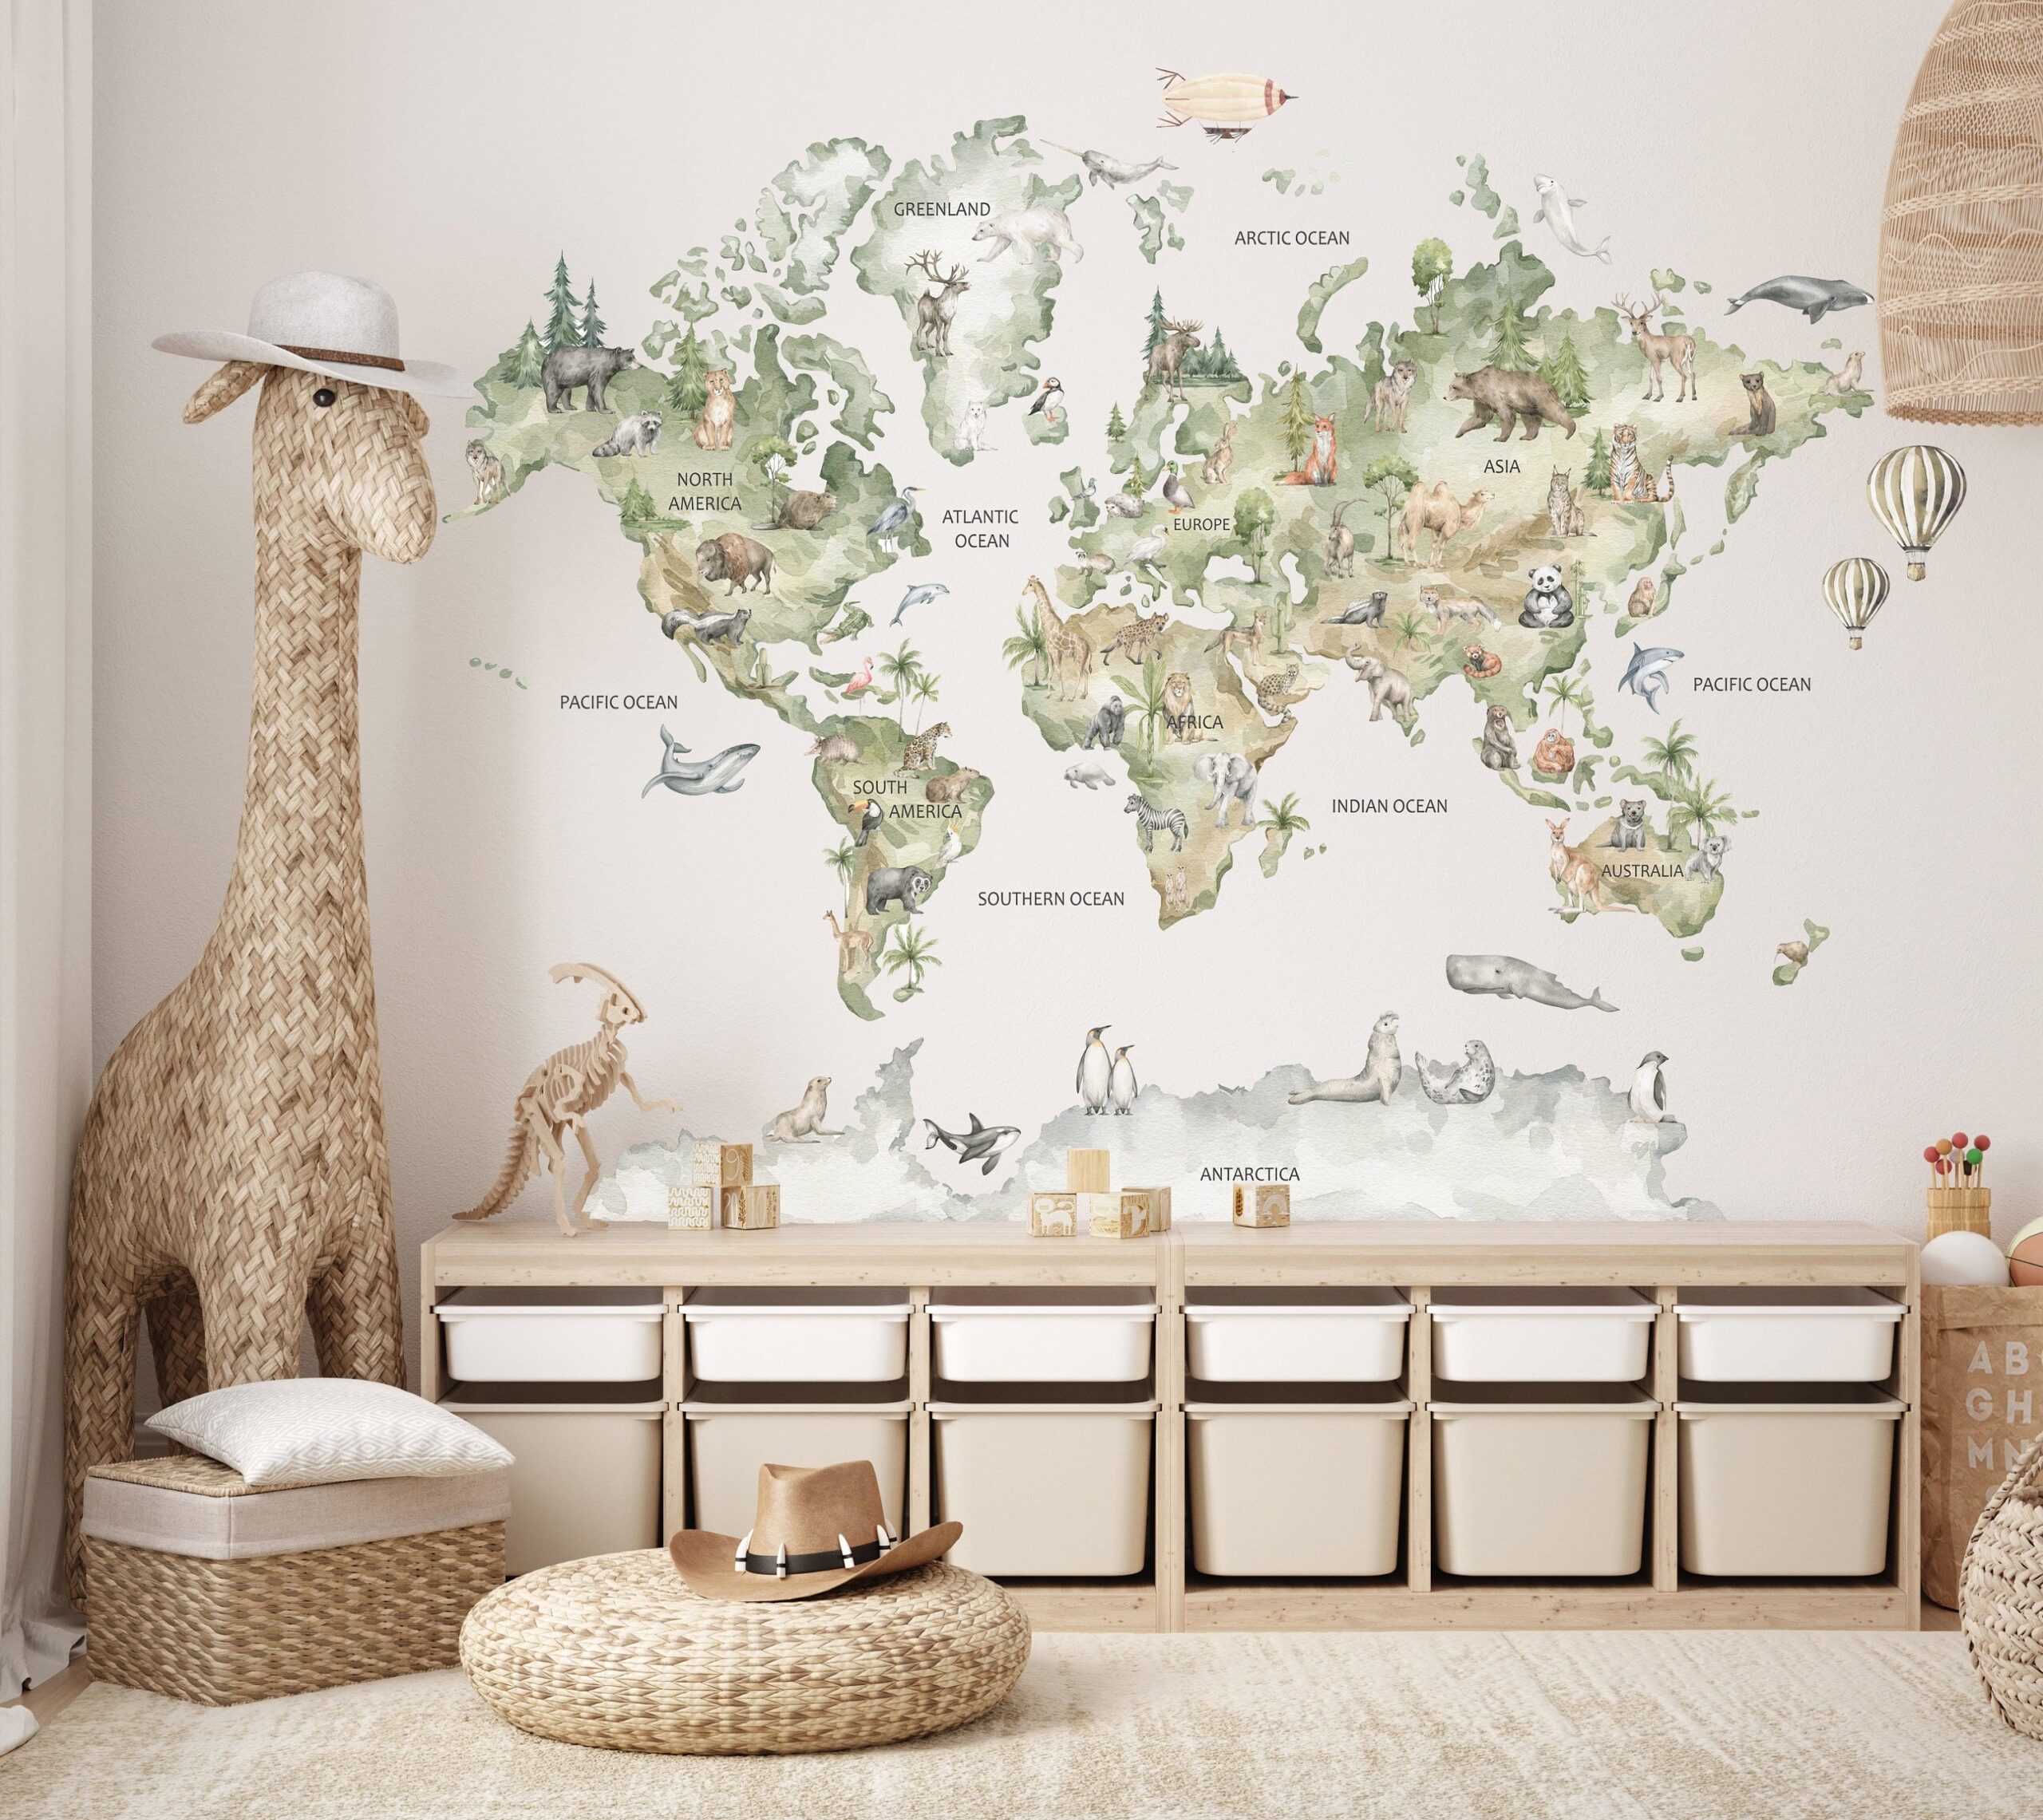 Lively Decor: Enhance Your Nursery with Wall Decals